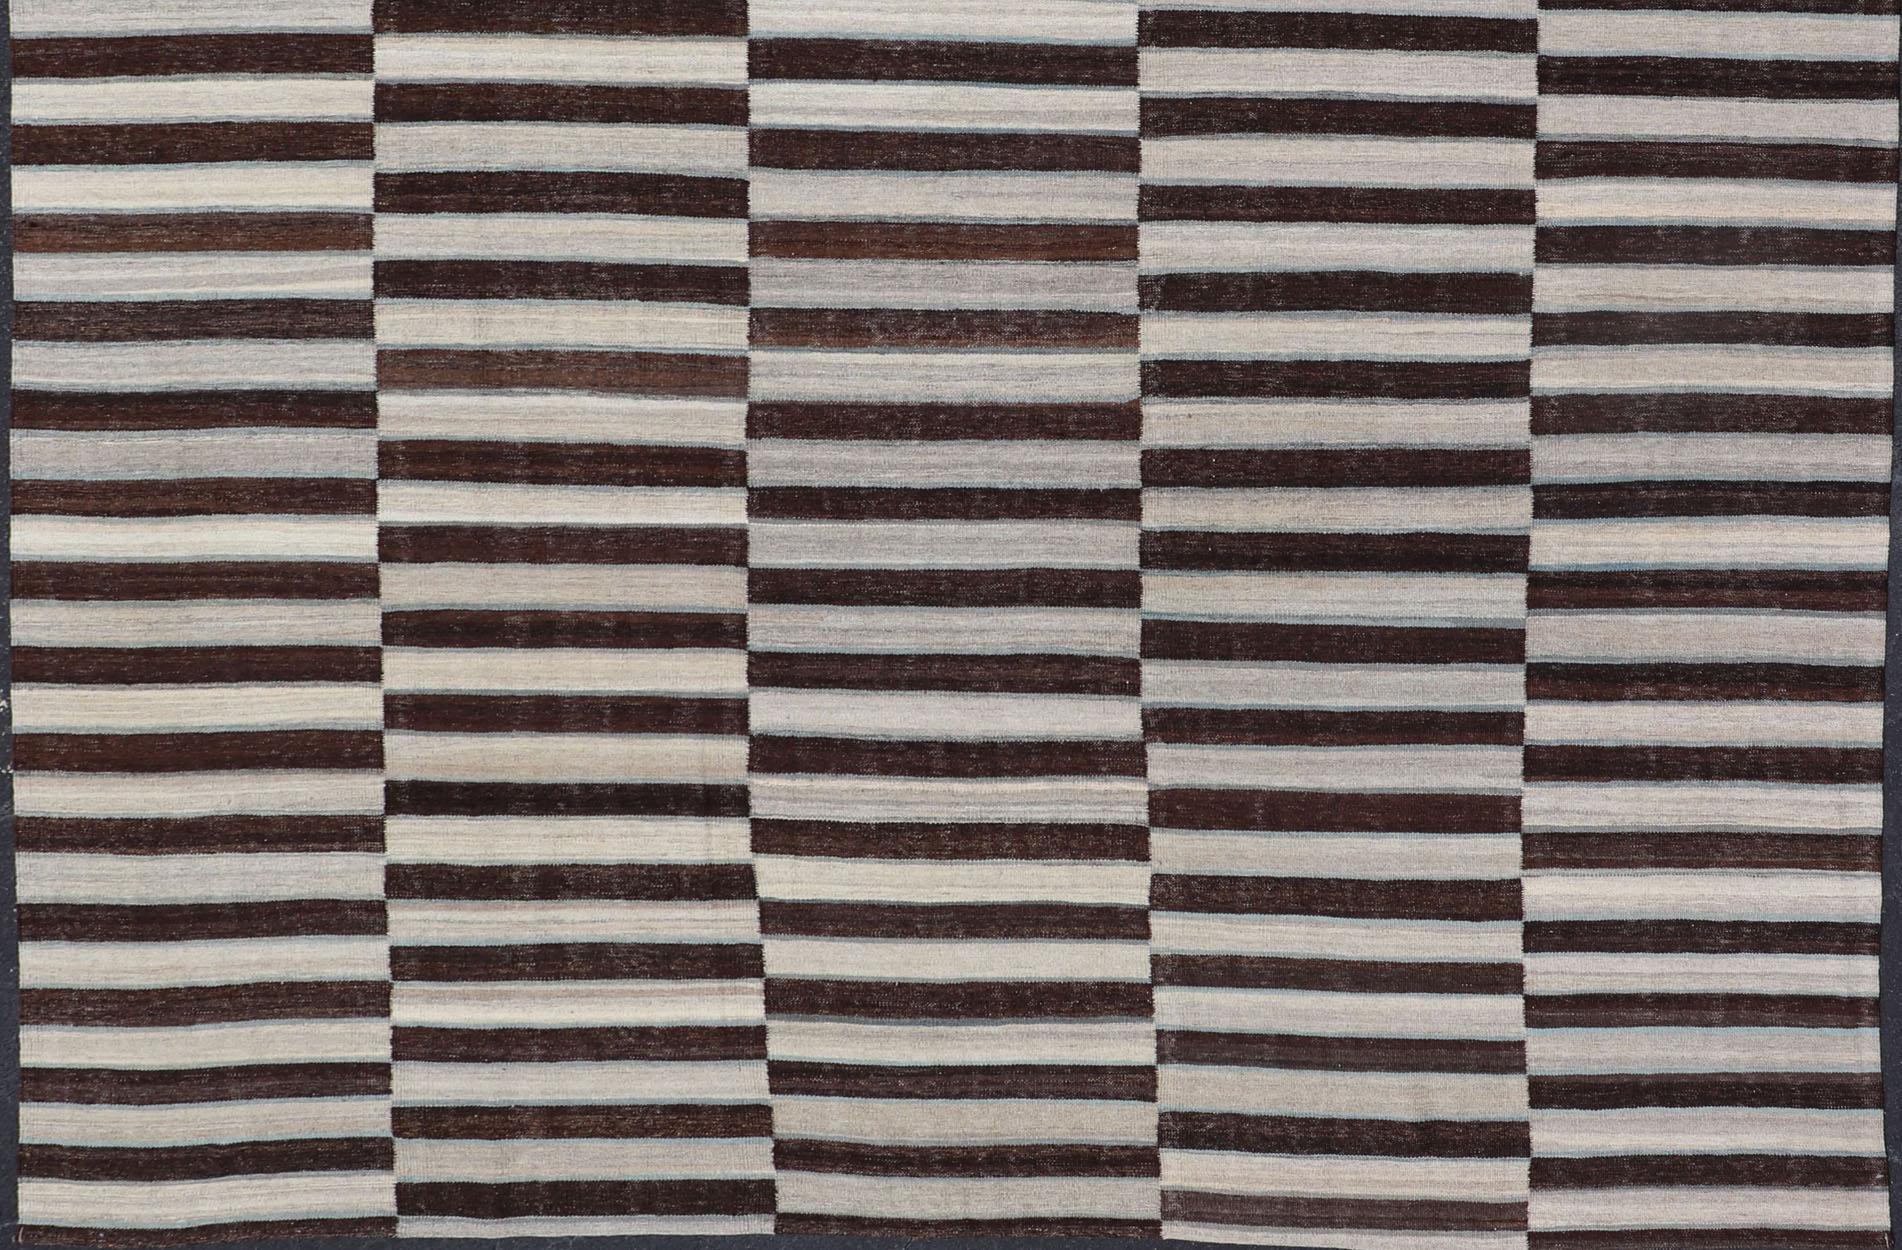 Hand-Woven Modern Kilim Rug in Multi-Panel Striped Design with Chocolate Brown, cream  For Sale